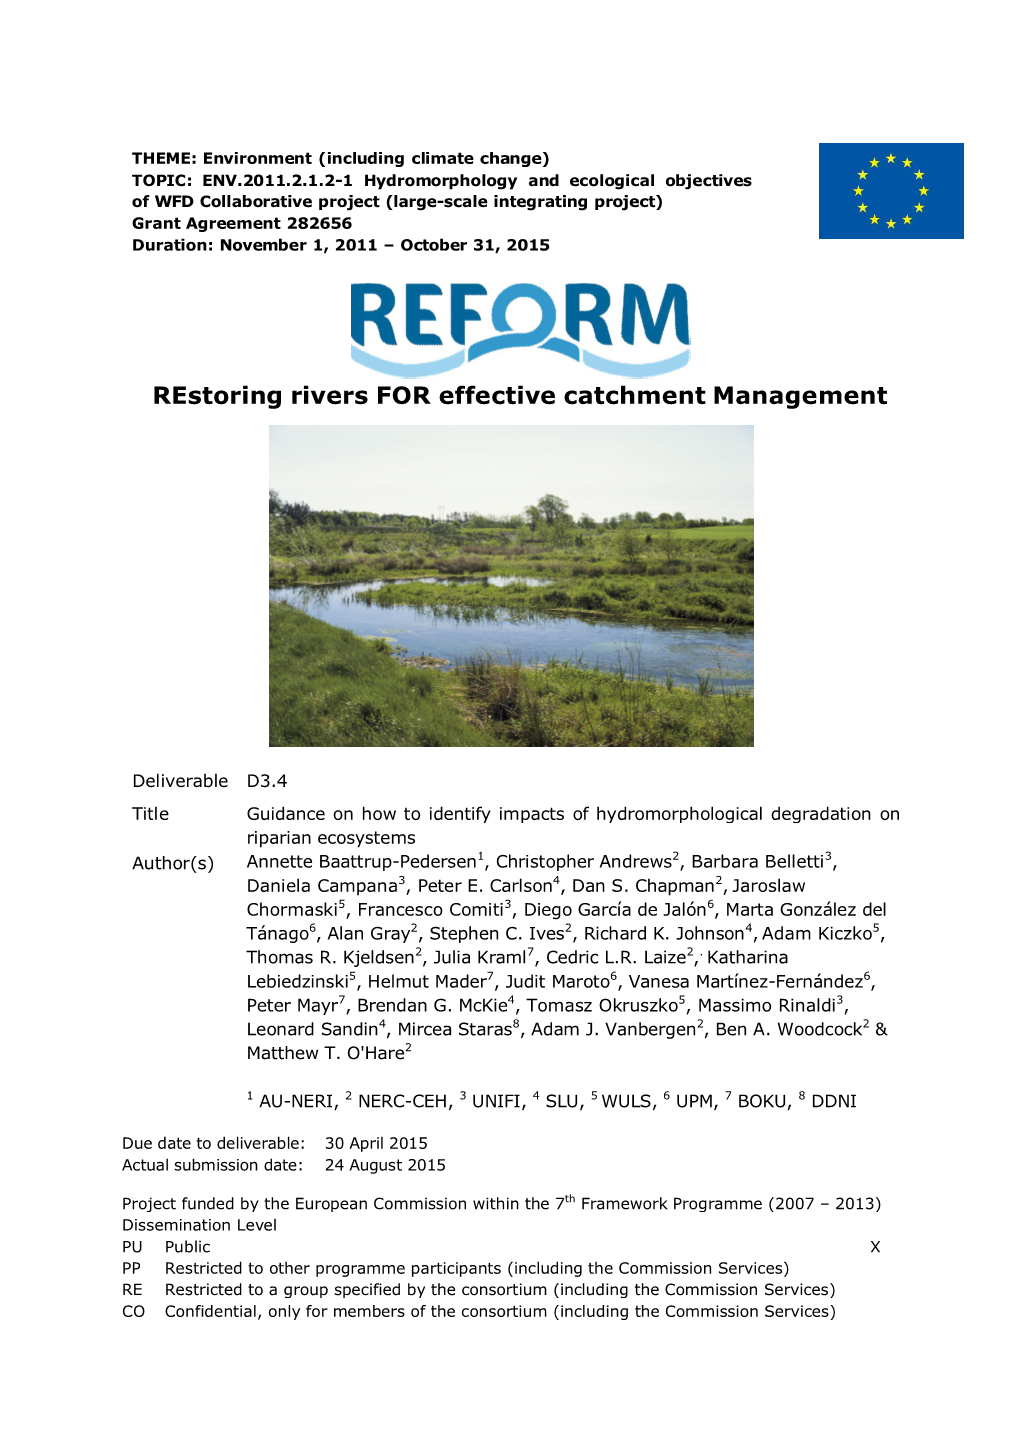 3.4 Guidance to Detect Impact of Hymo Degradation on Riparian